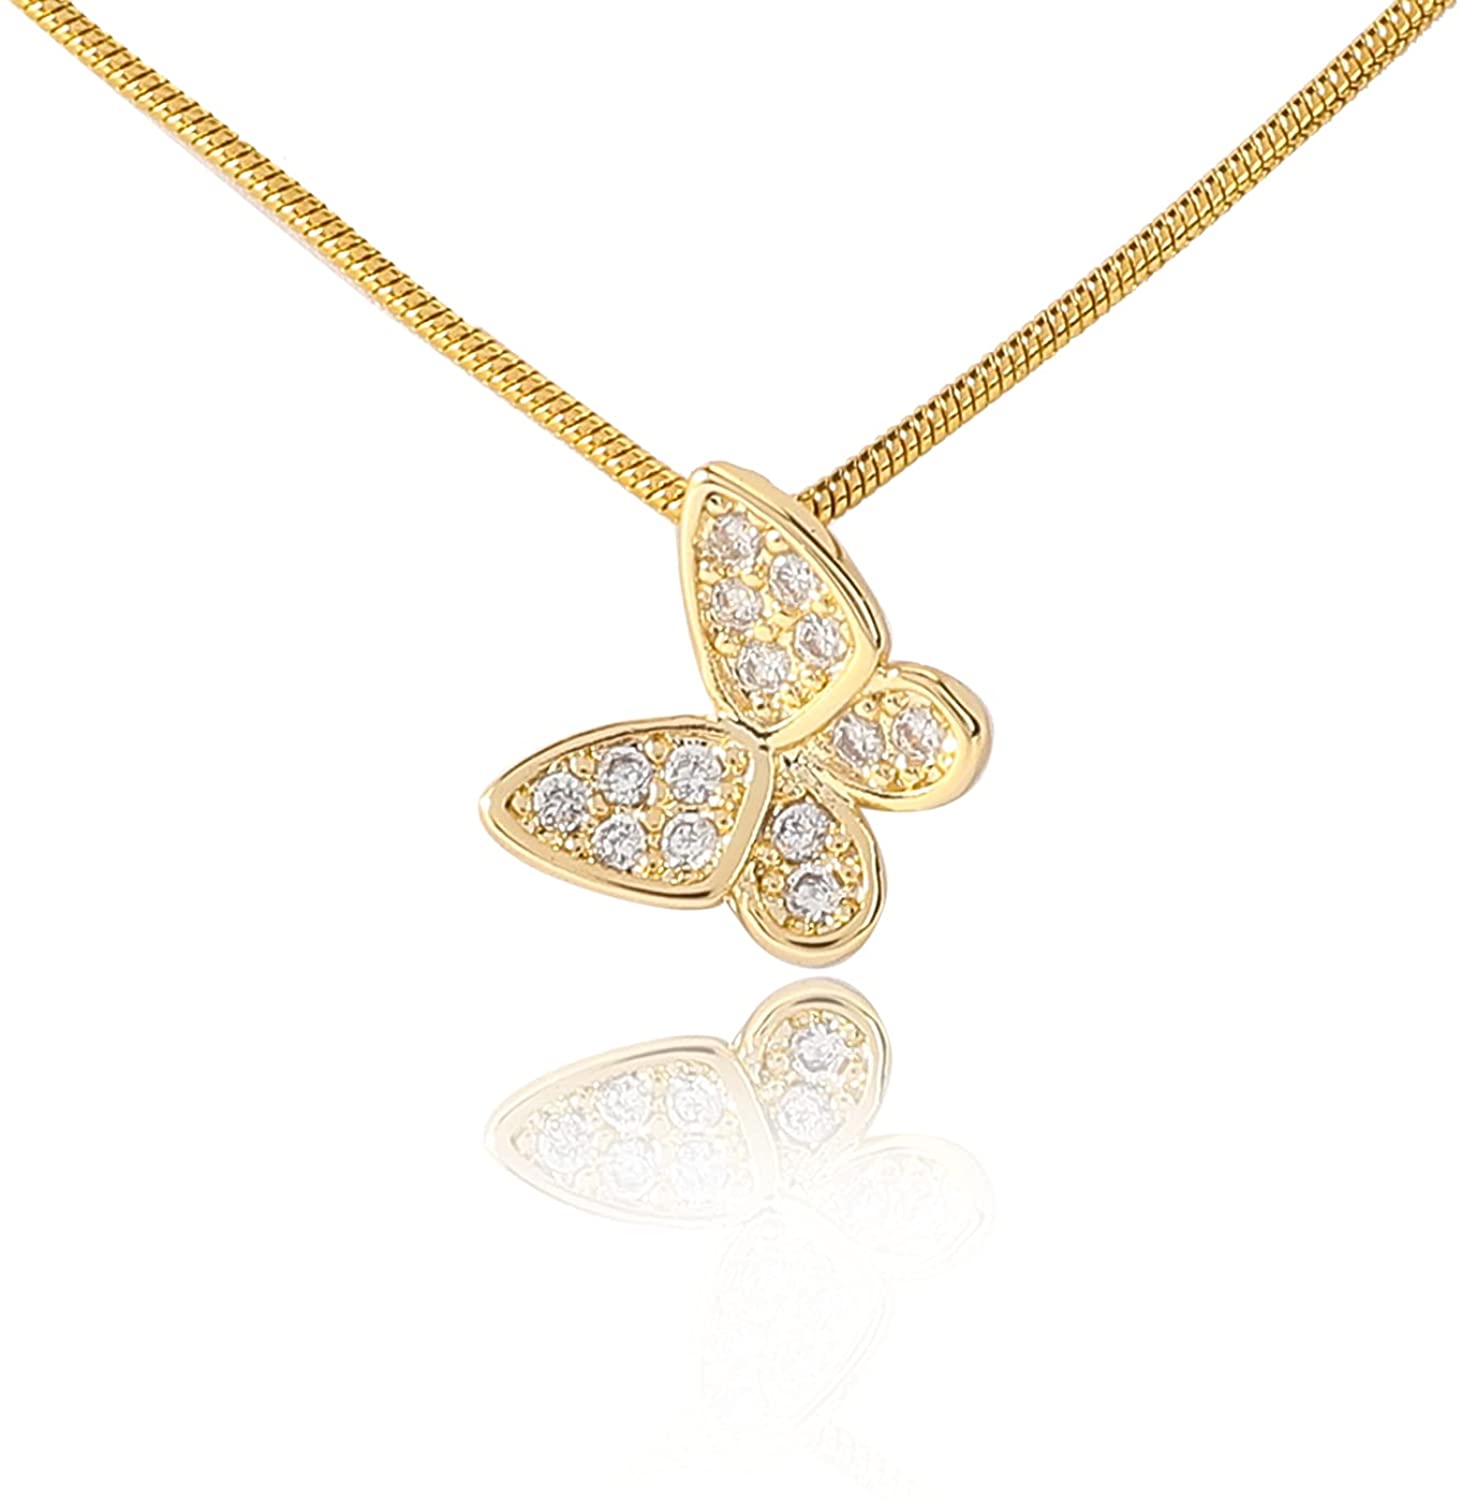 Dainty 14k Yellow Gold Butterfly Pendant With CZ Stones.